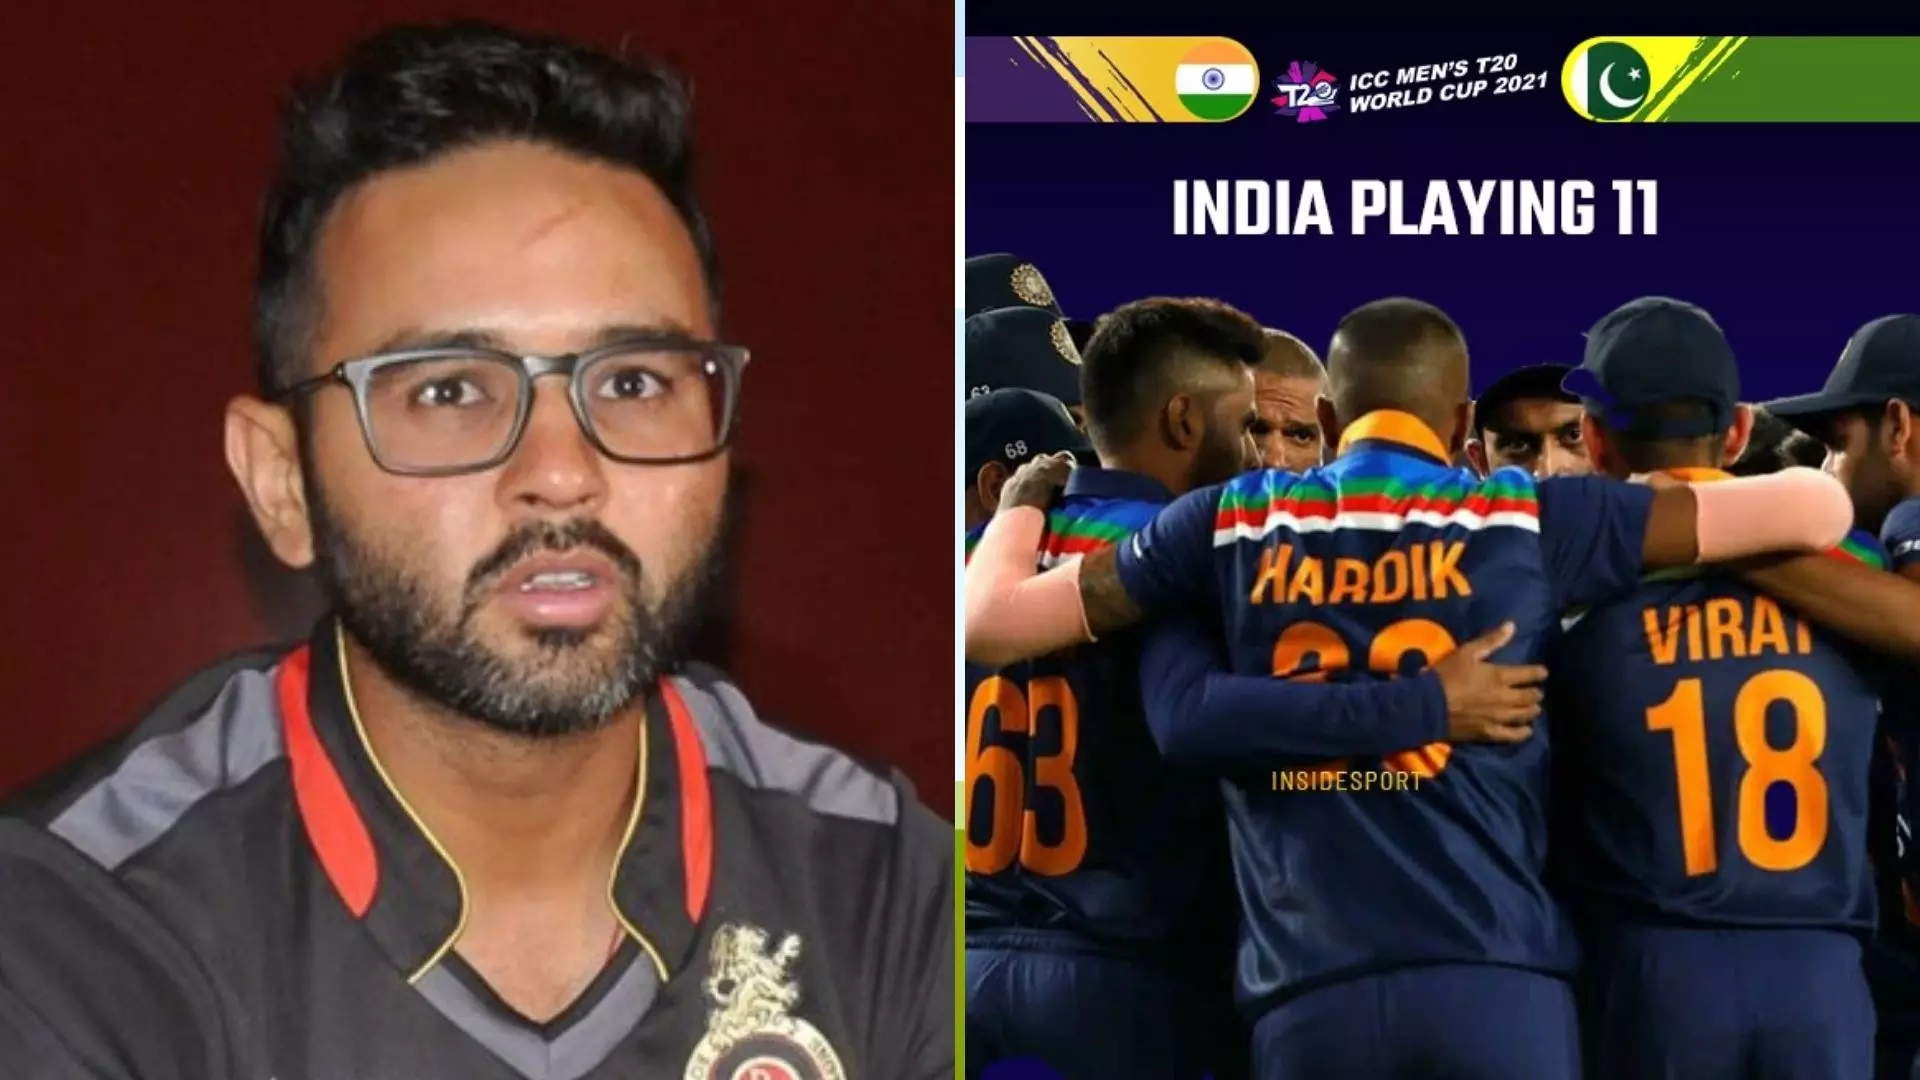 Parthiv Patel Announced his Team India Playing XI Against India vs Pakistan in T20 World Cup 2021